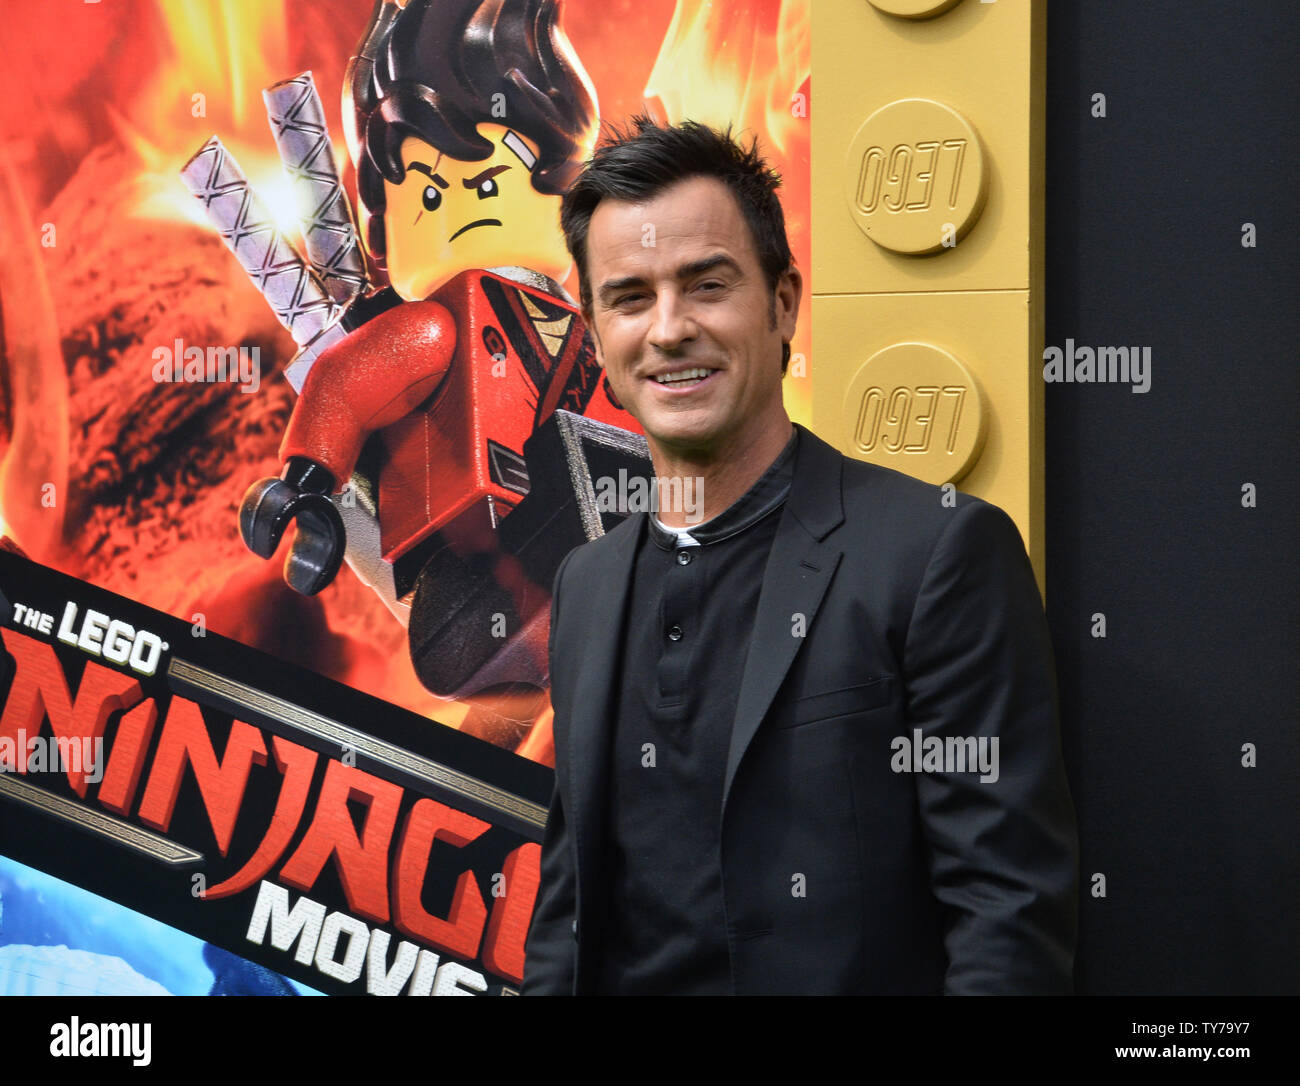 Cast member Justin Theroux, the voice of Garmadon in the animated comedy  "The Lego Ninjago Movie" attends the premiere of the film at the Regency  Village Theatre in the Westwood section of